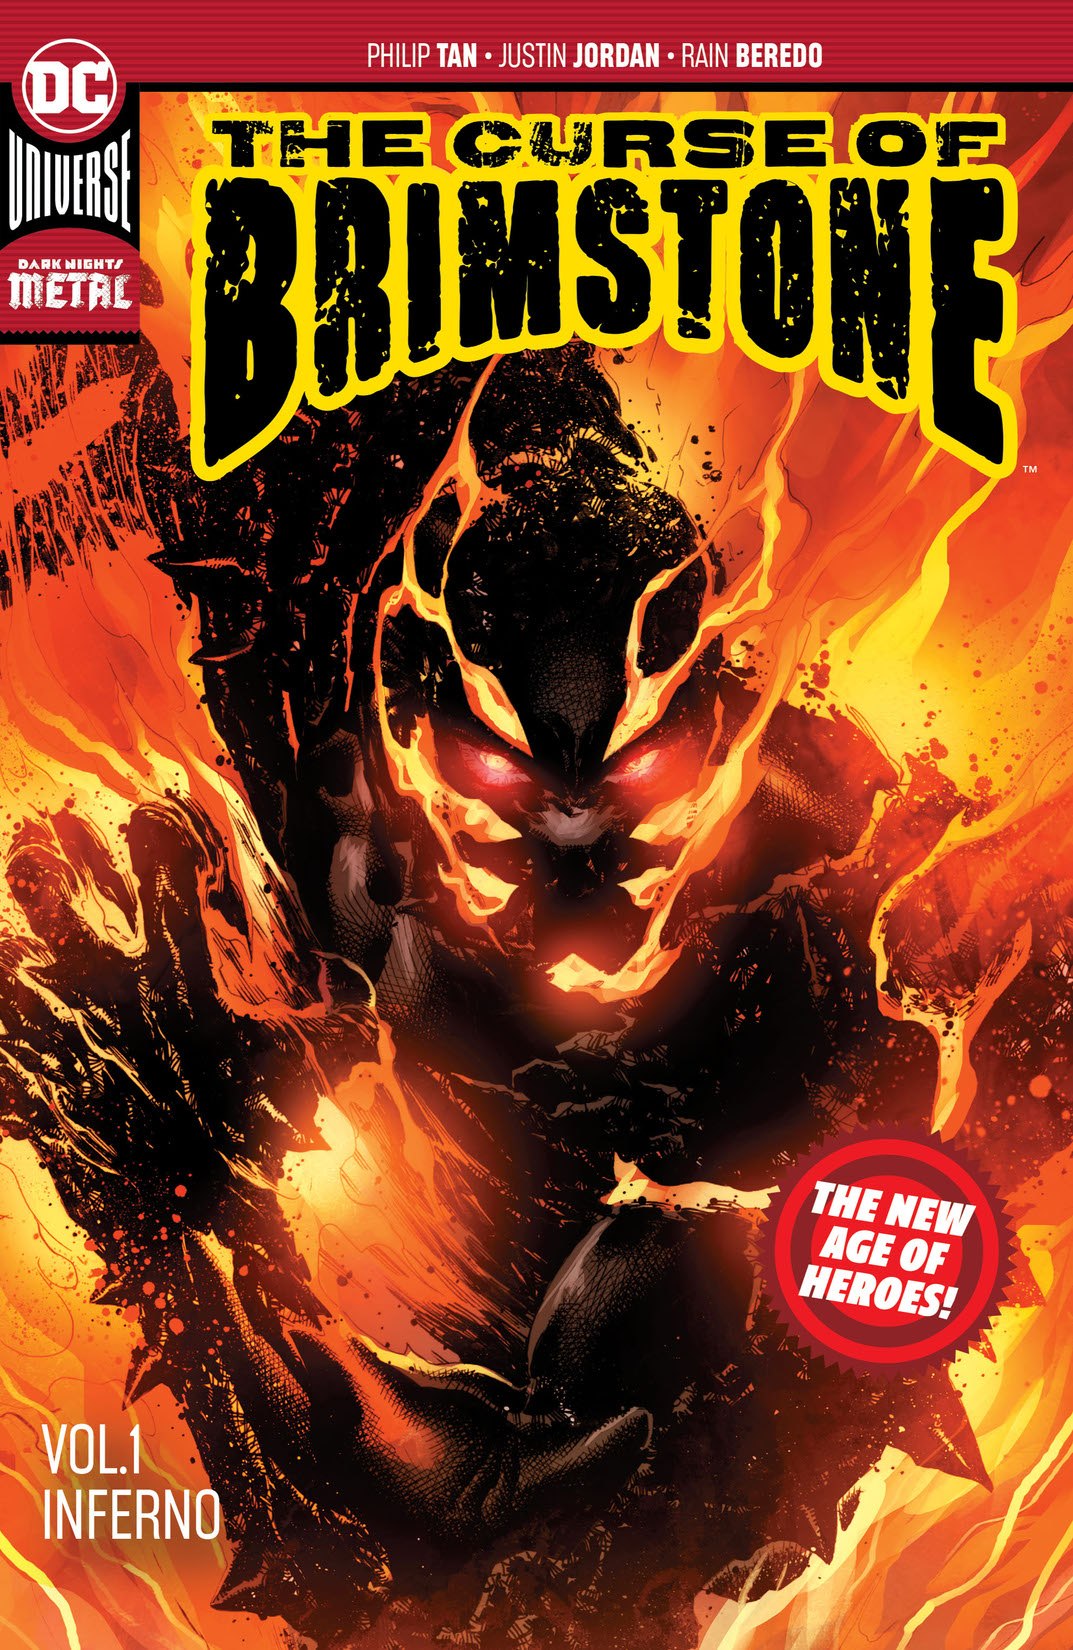 The Curse of Brimstone Vol. 1: Inferno (New Age of Heroes) preview images